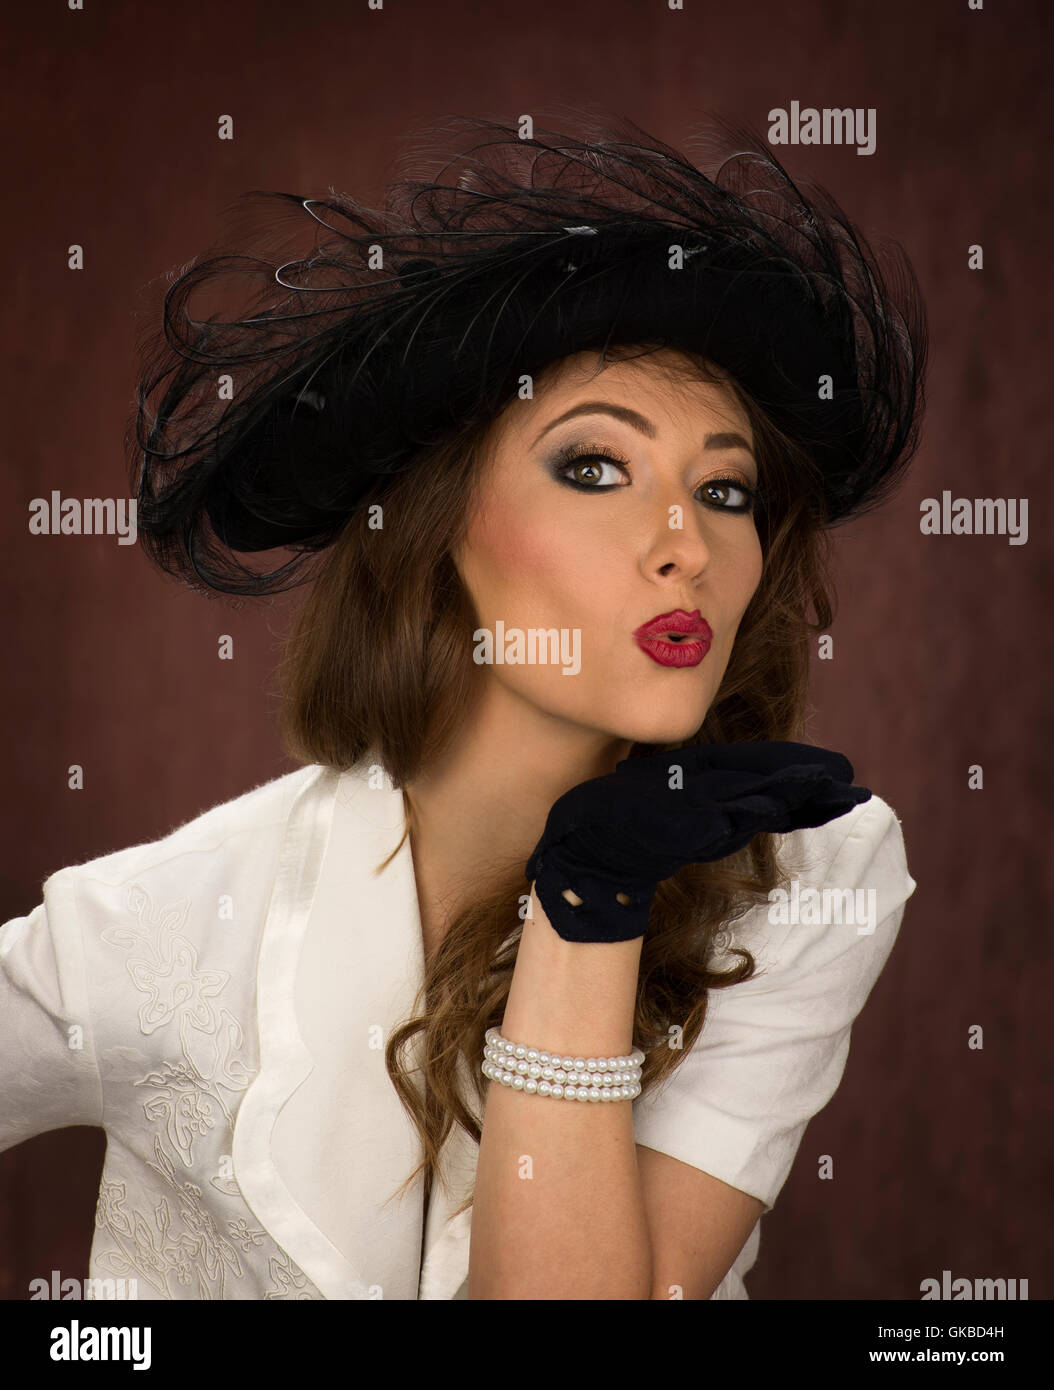 Young brunette woman modeling a vintage black hat Stock Photo